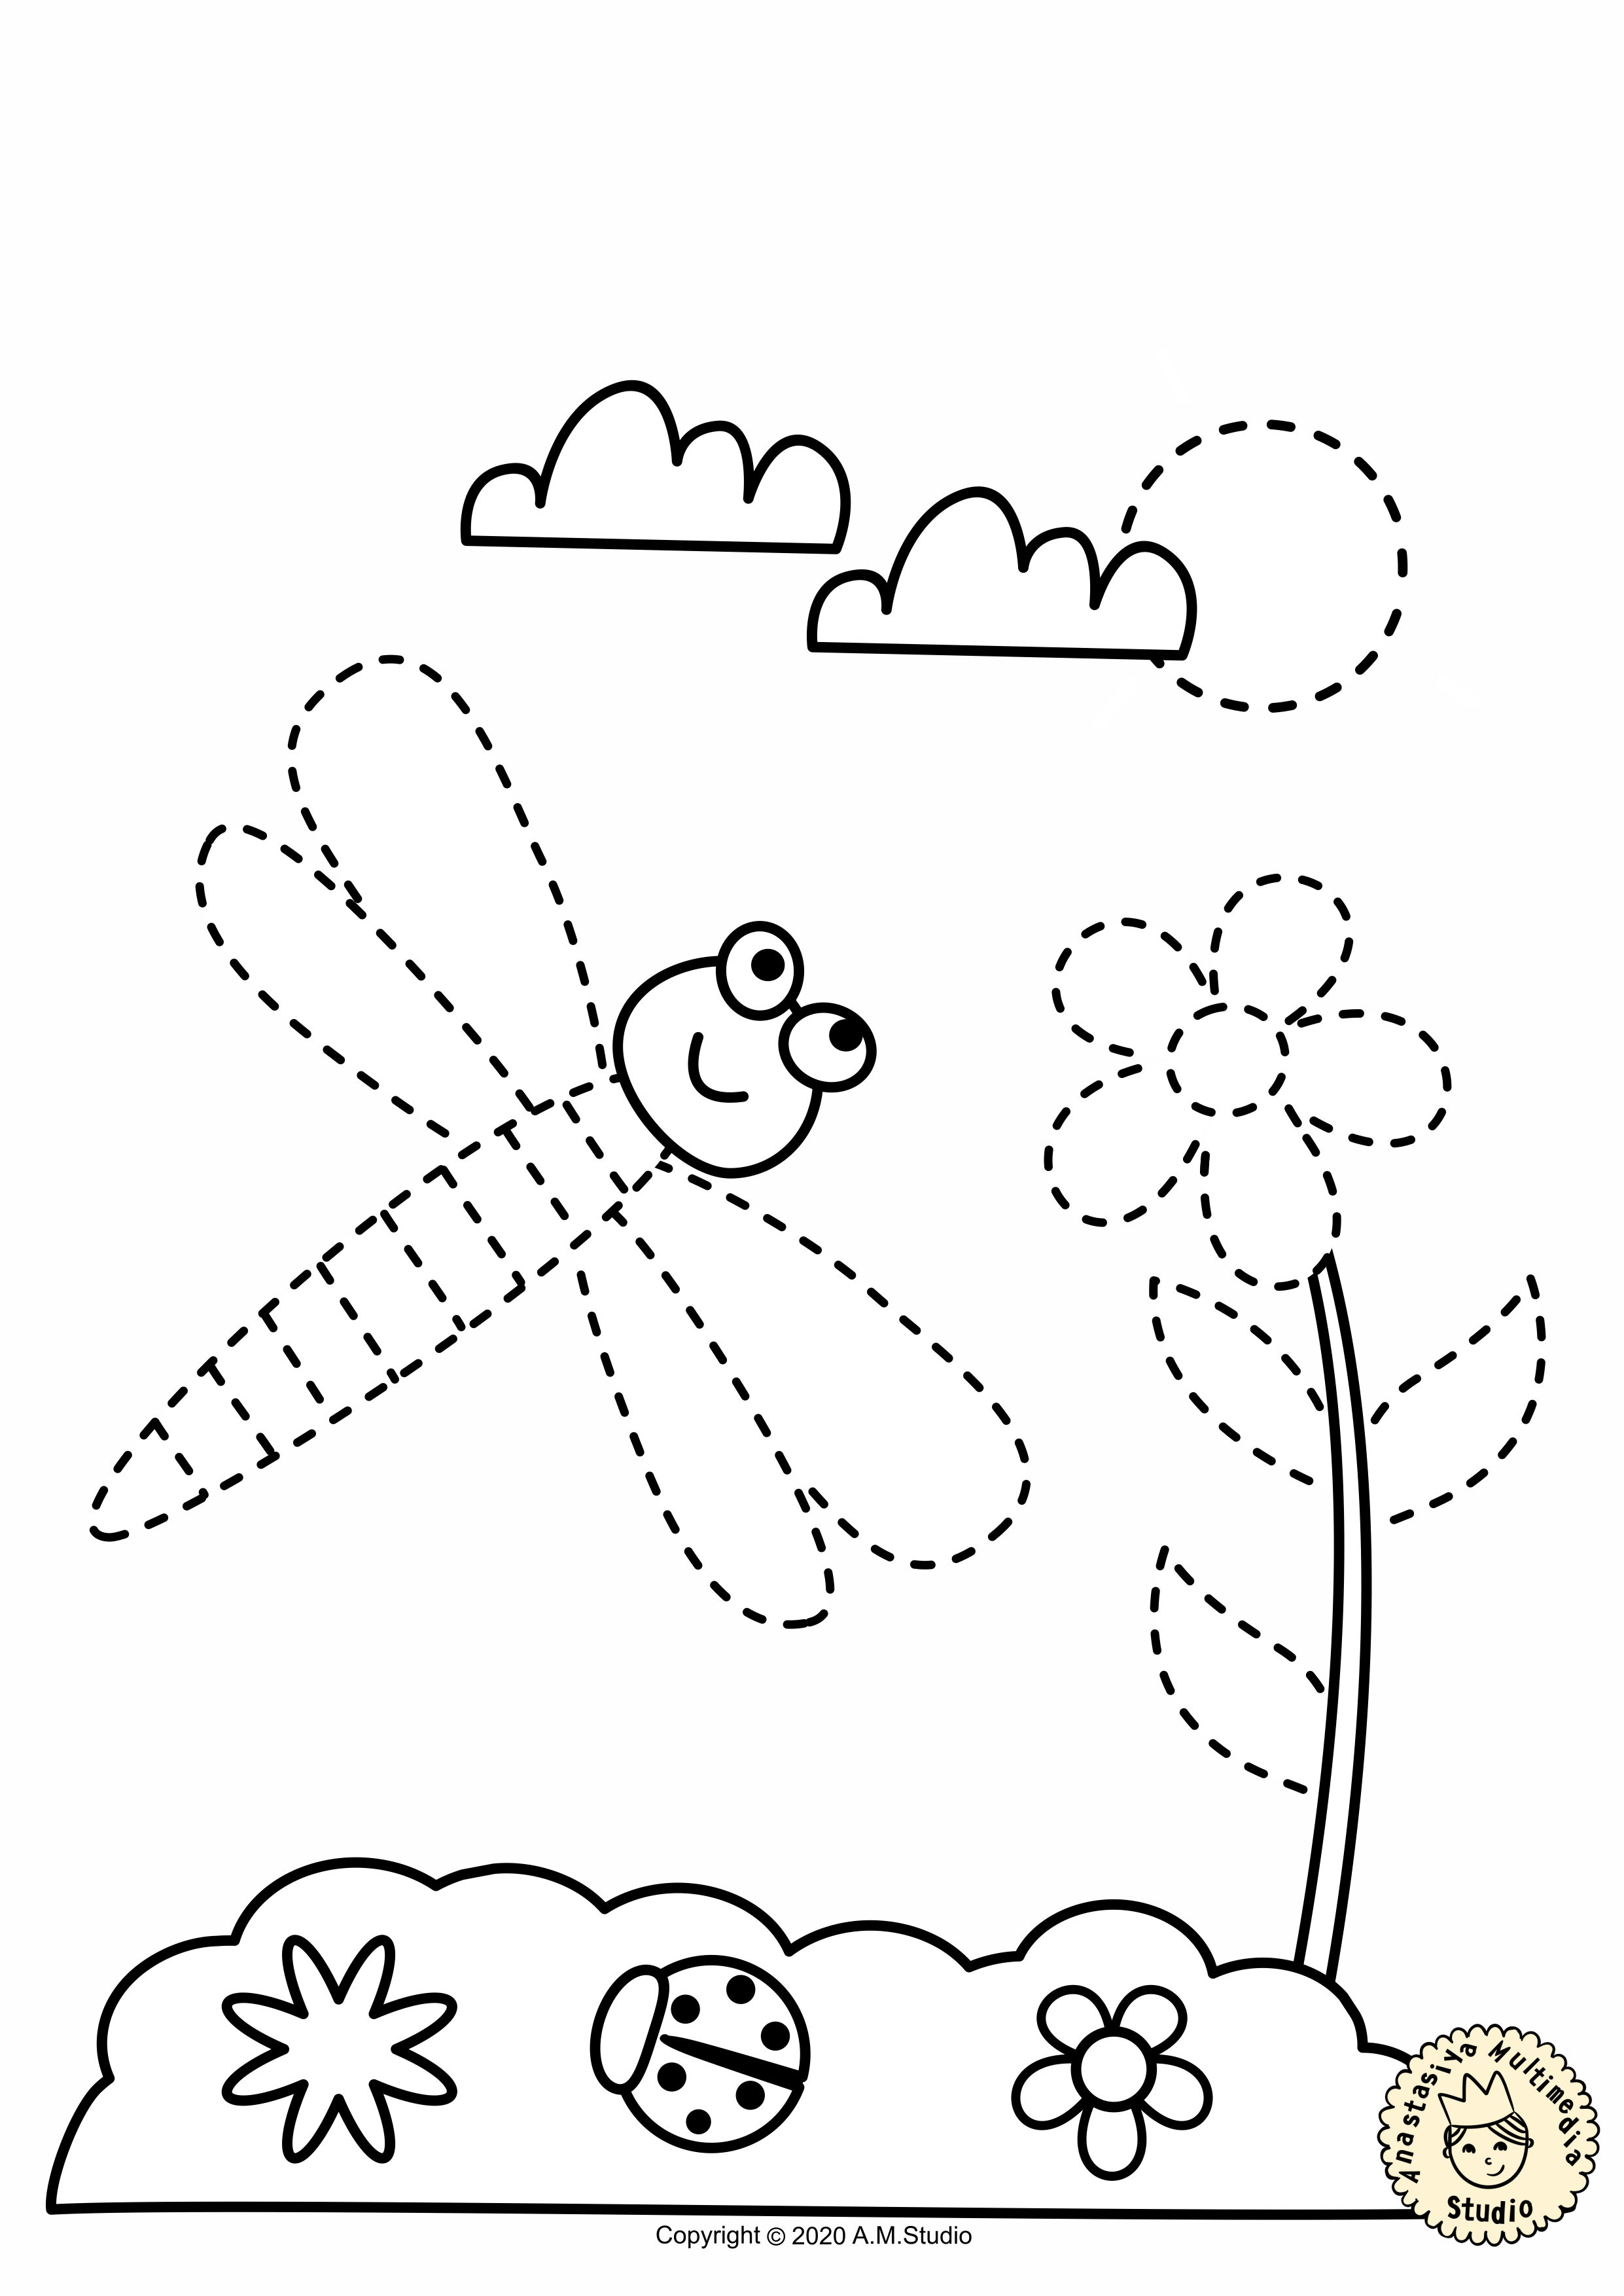 Free picture tracing activities coloring sheets pre